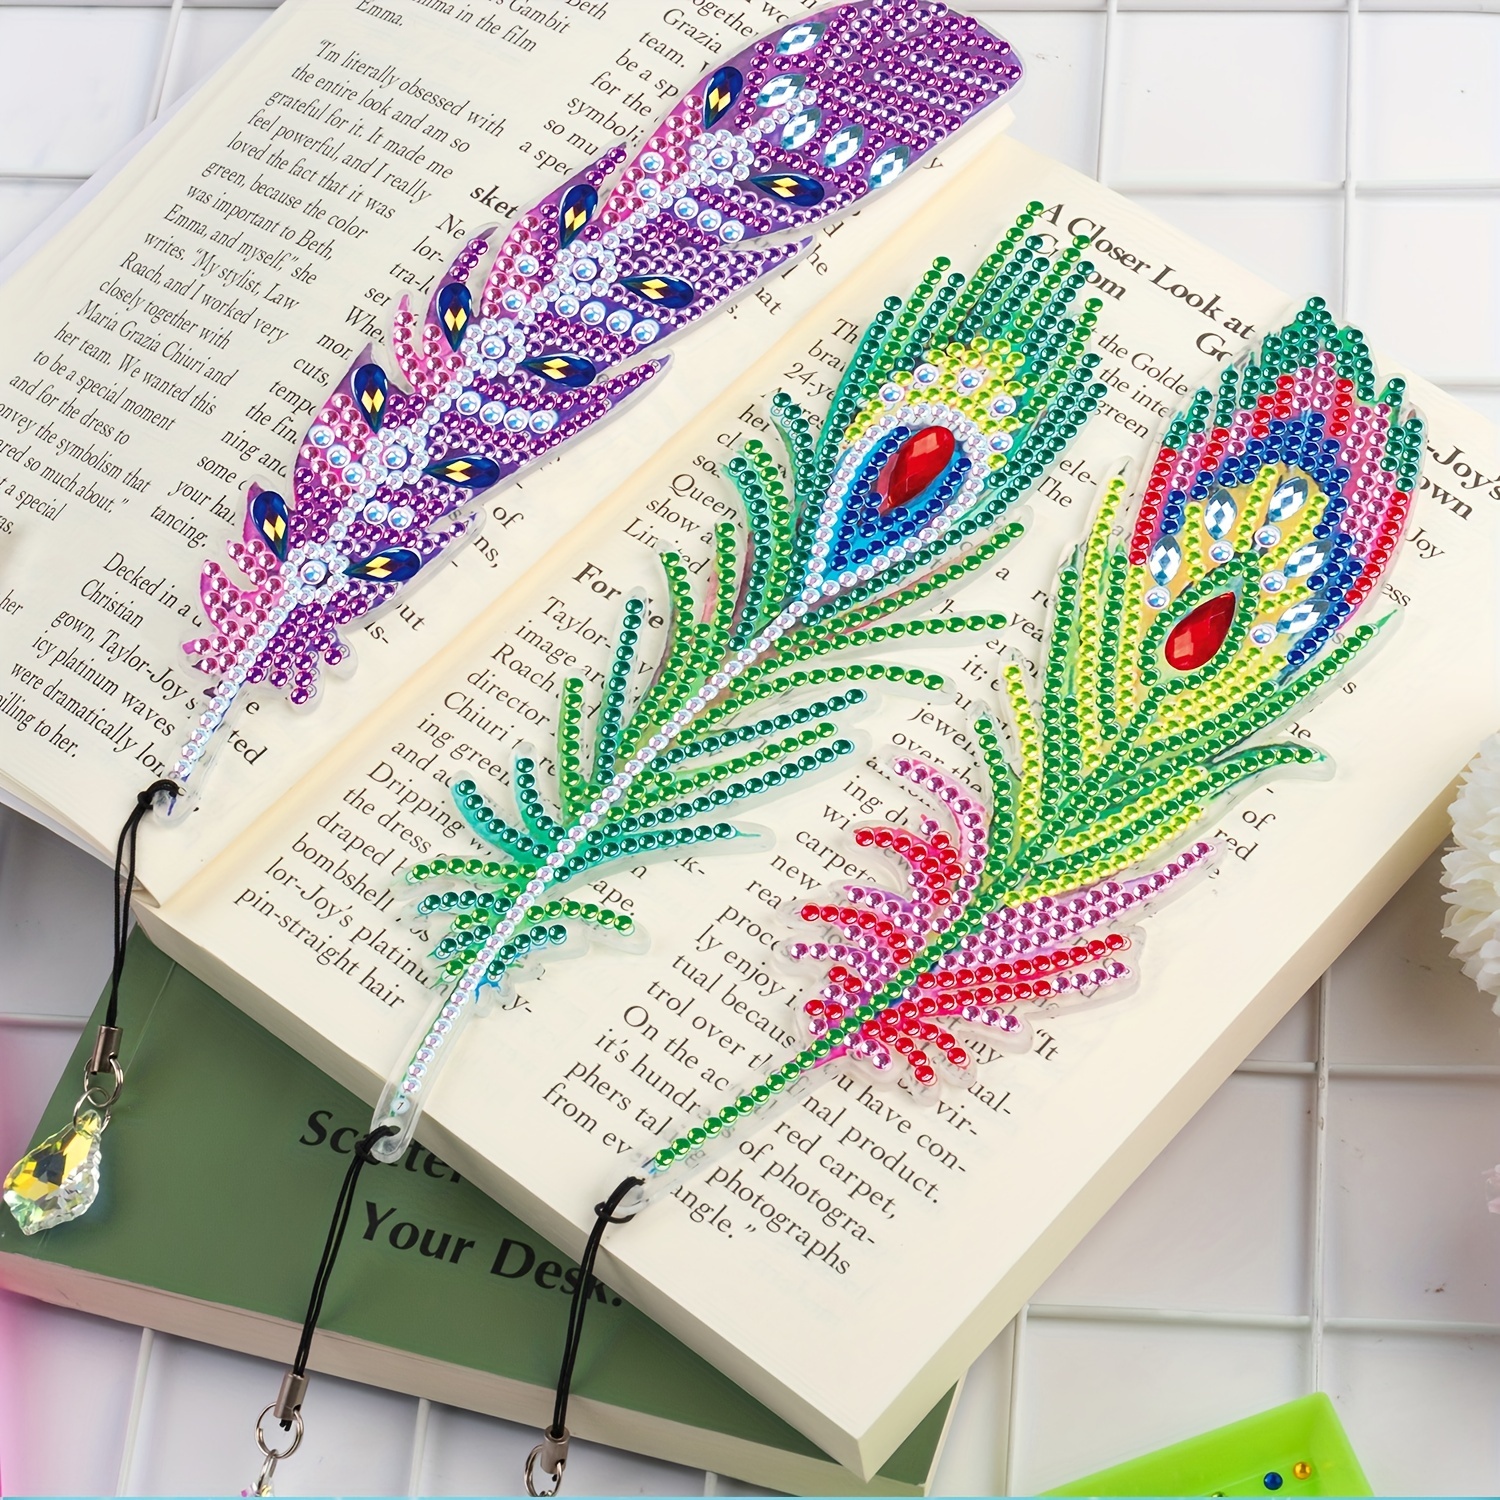 6pcs DIY Feather Diamond Painting Bookmarks with Crystal Pendant (SQ204)